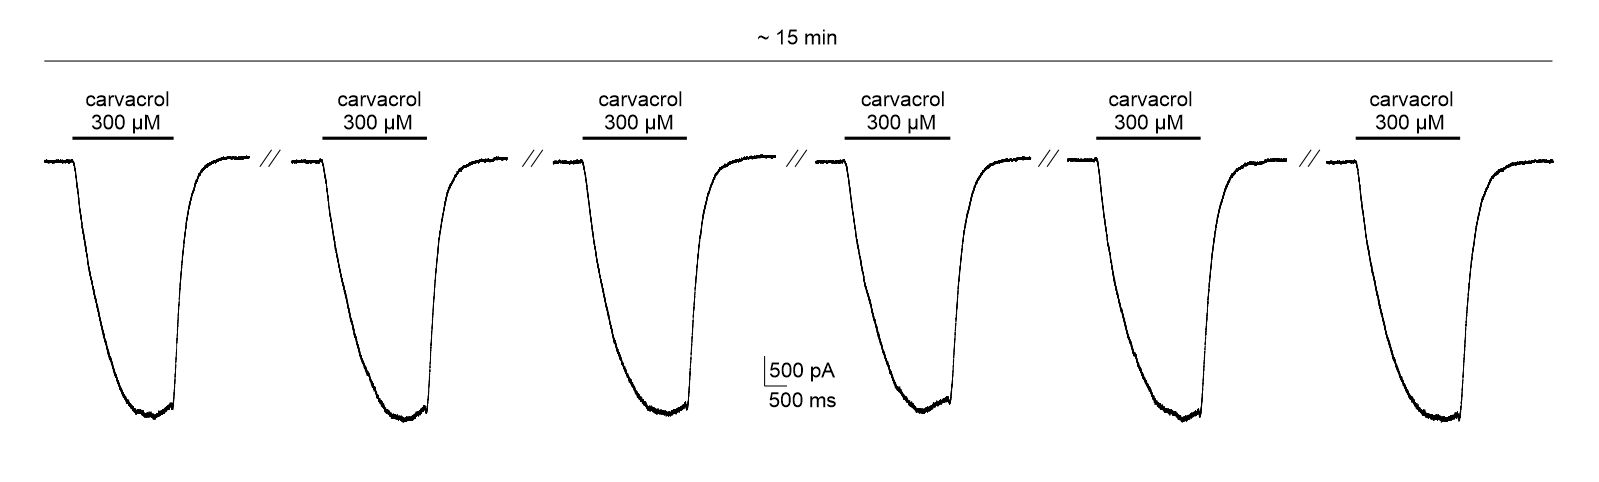 repeated application of the agonist carvacrol